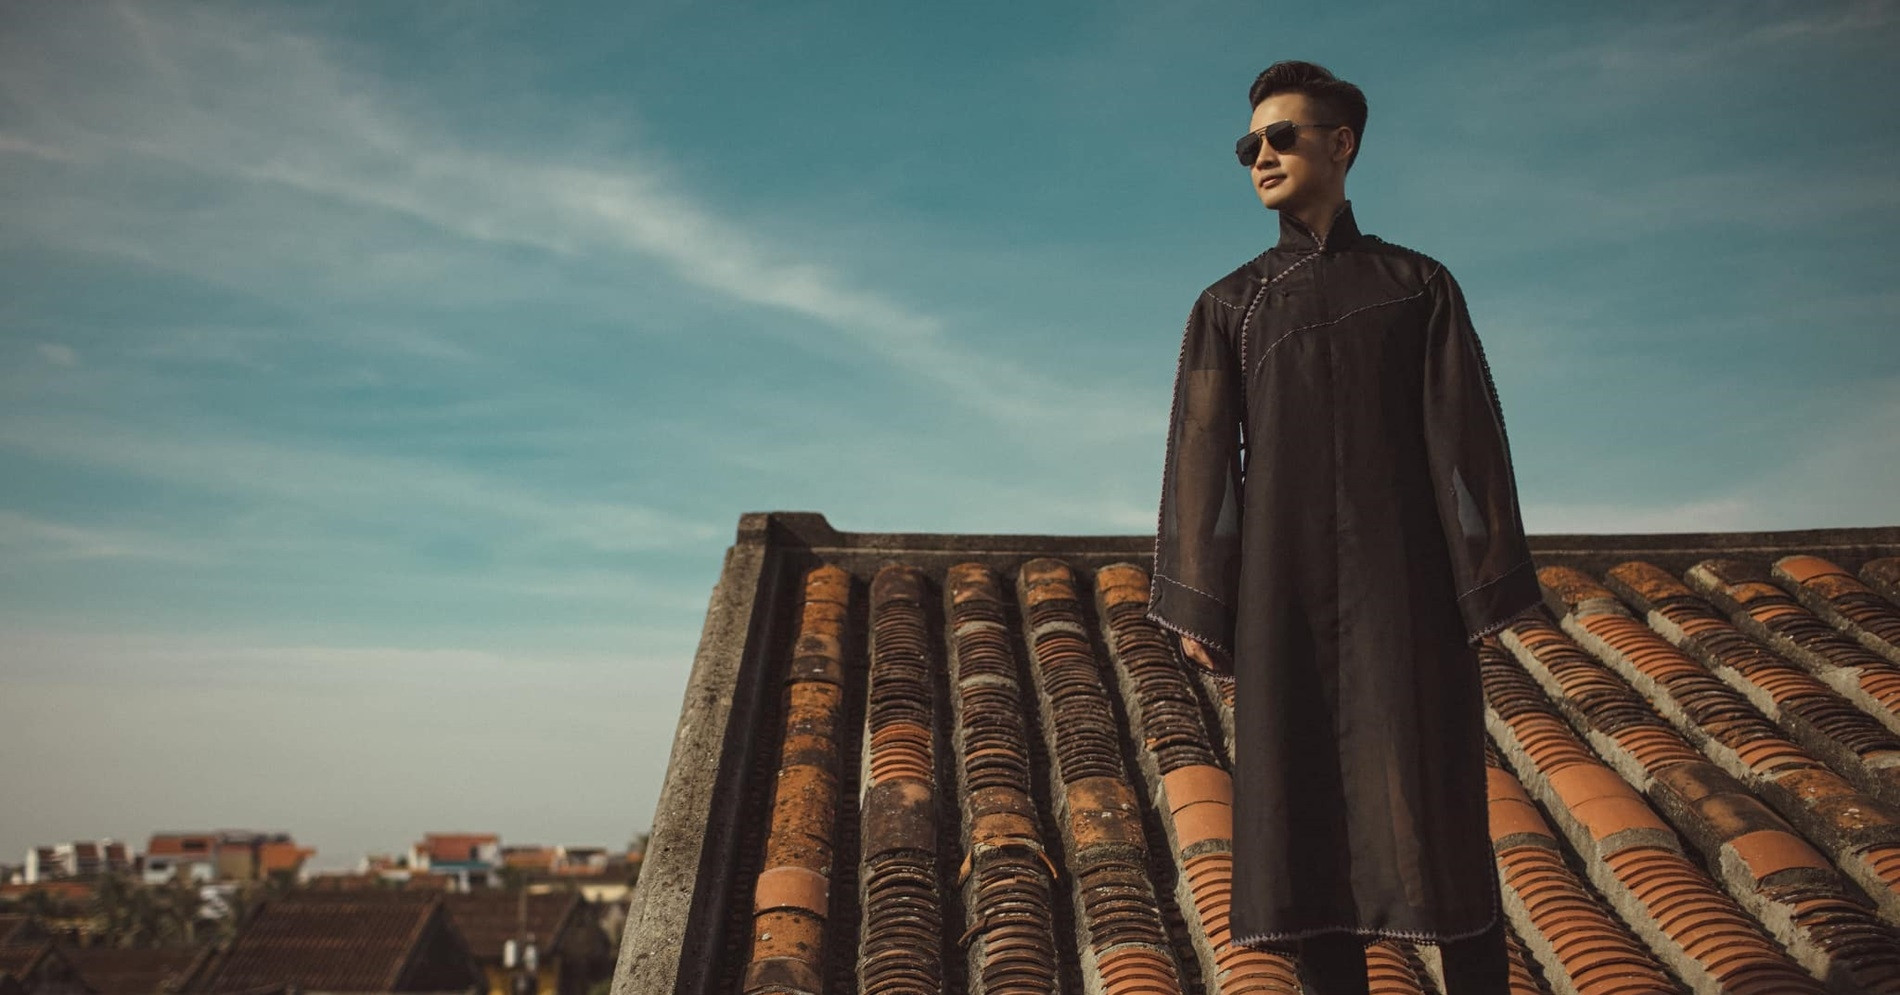 Cafe owner refuses singer Duc Tuan permission for a photo shoot on the roof in Hoi An